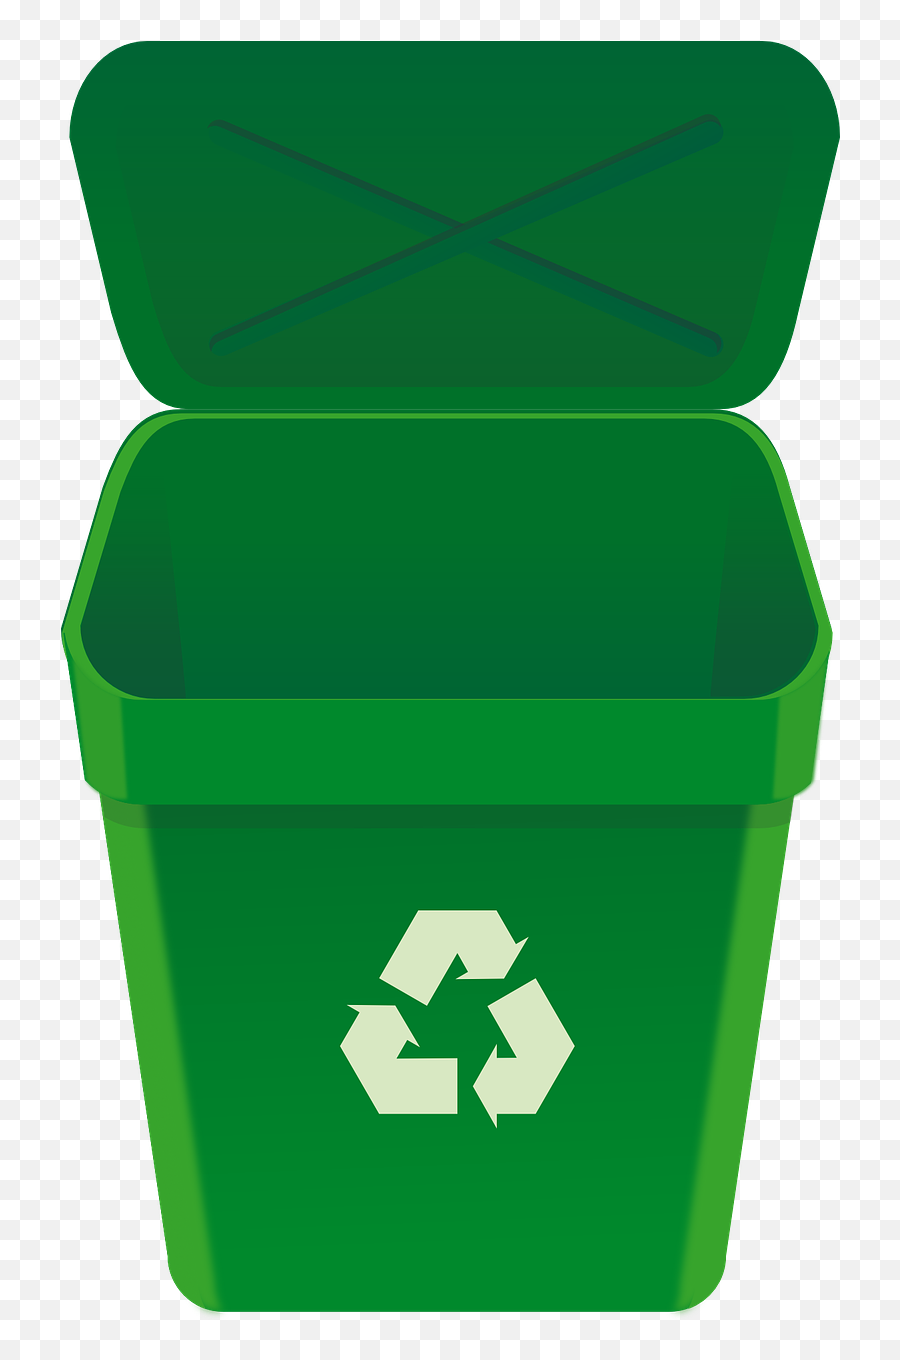 Recycle Free Recycling And Trash - Recycle Trash Can Clipart Emoji,Garbage Can Emoji